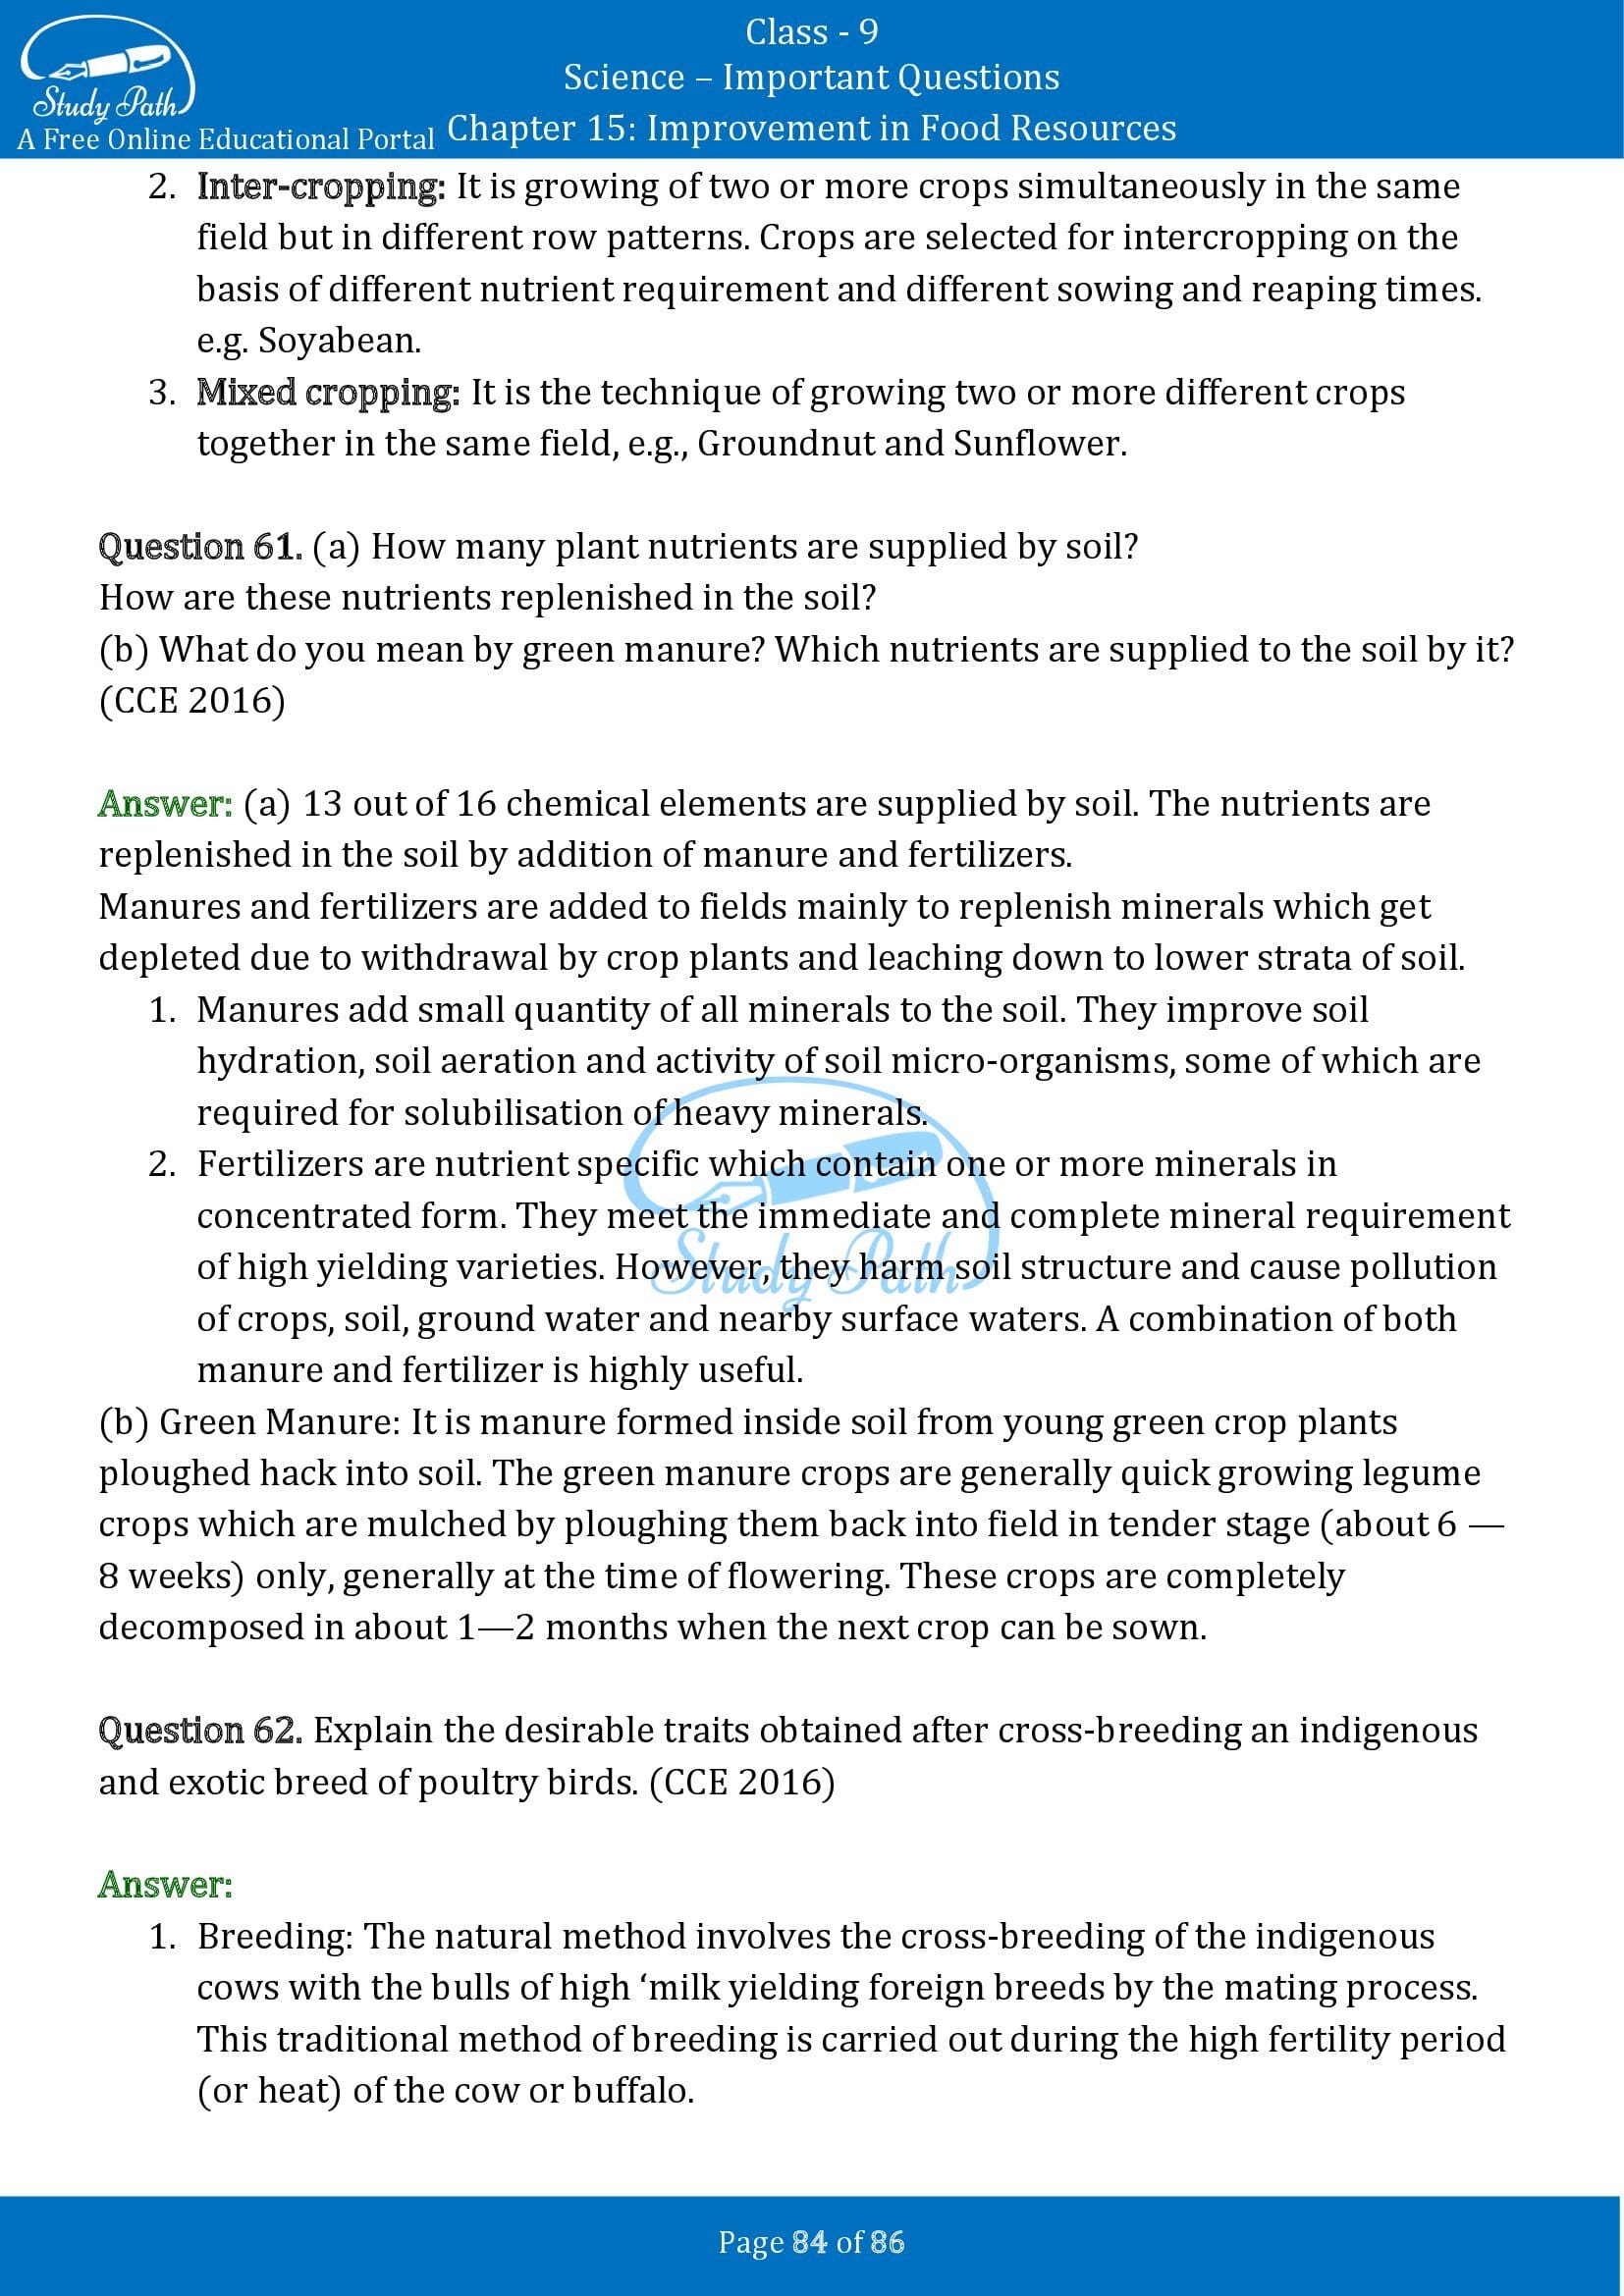 Important Questions for Class 9 Science Chapter 15 Improvement in Food Resources 00084